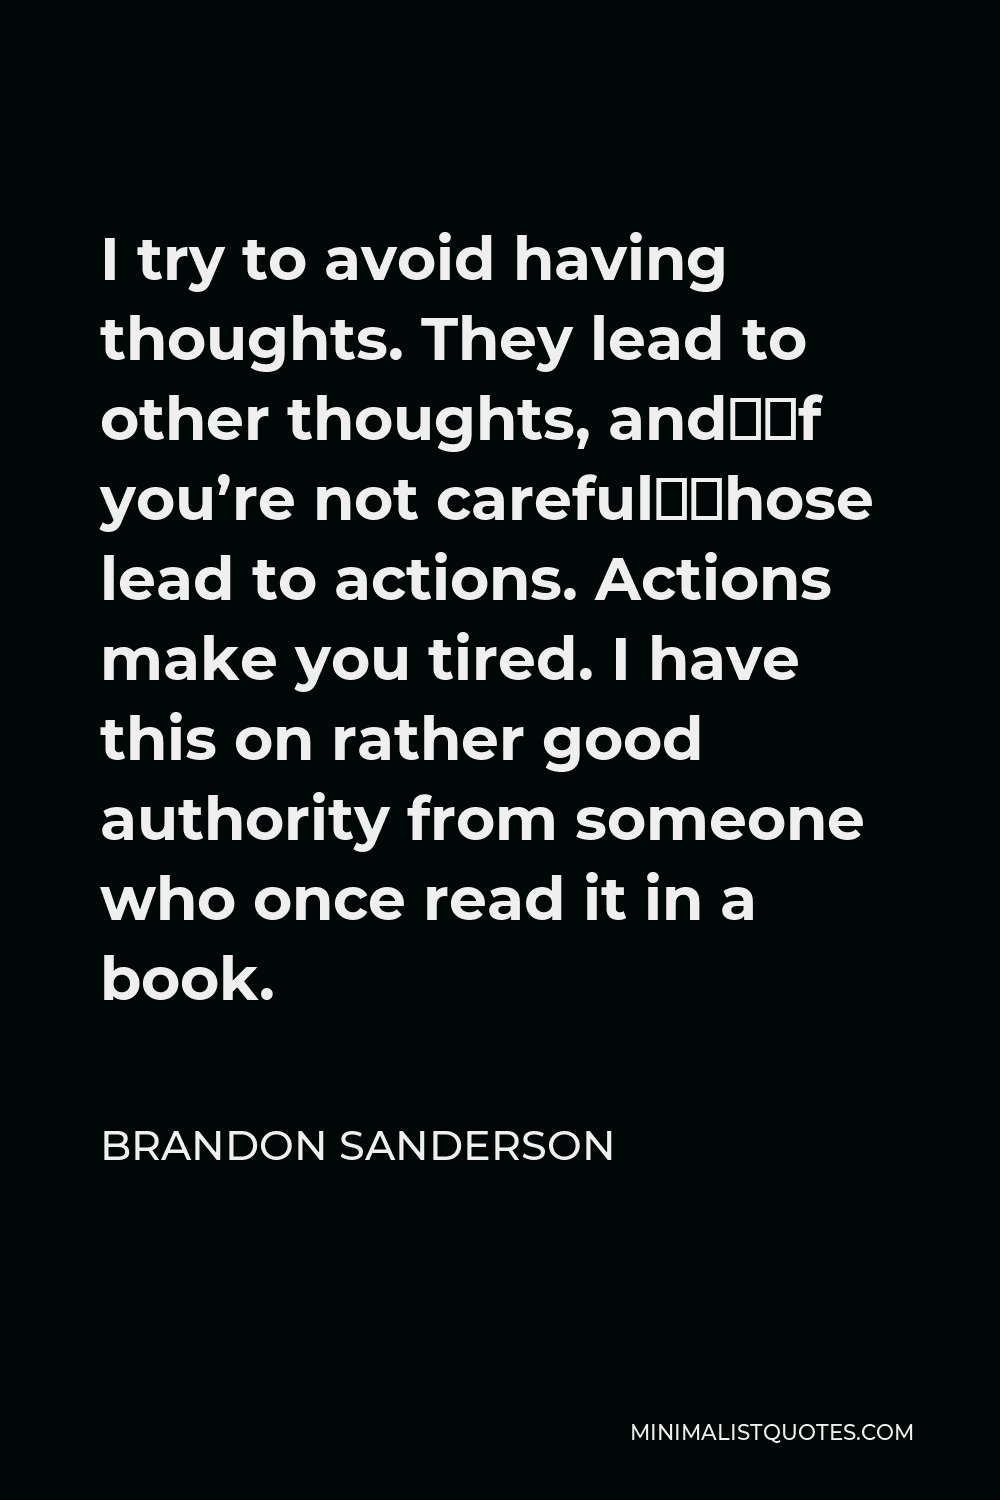 Brandon Sanderson Quote - I try to avoid having thoughts. They lead to other thoughts, and—if you’re not careful—those lead to actions. Actions make you tired. I have this on rather good authority from someone who once read it in a book.